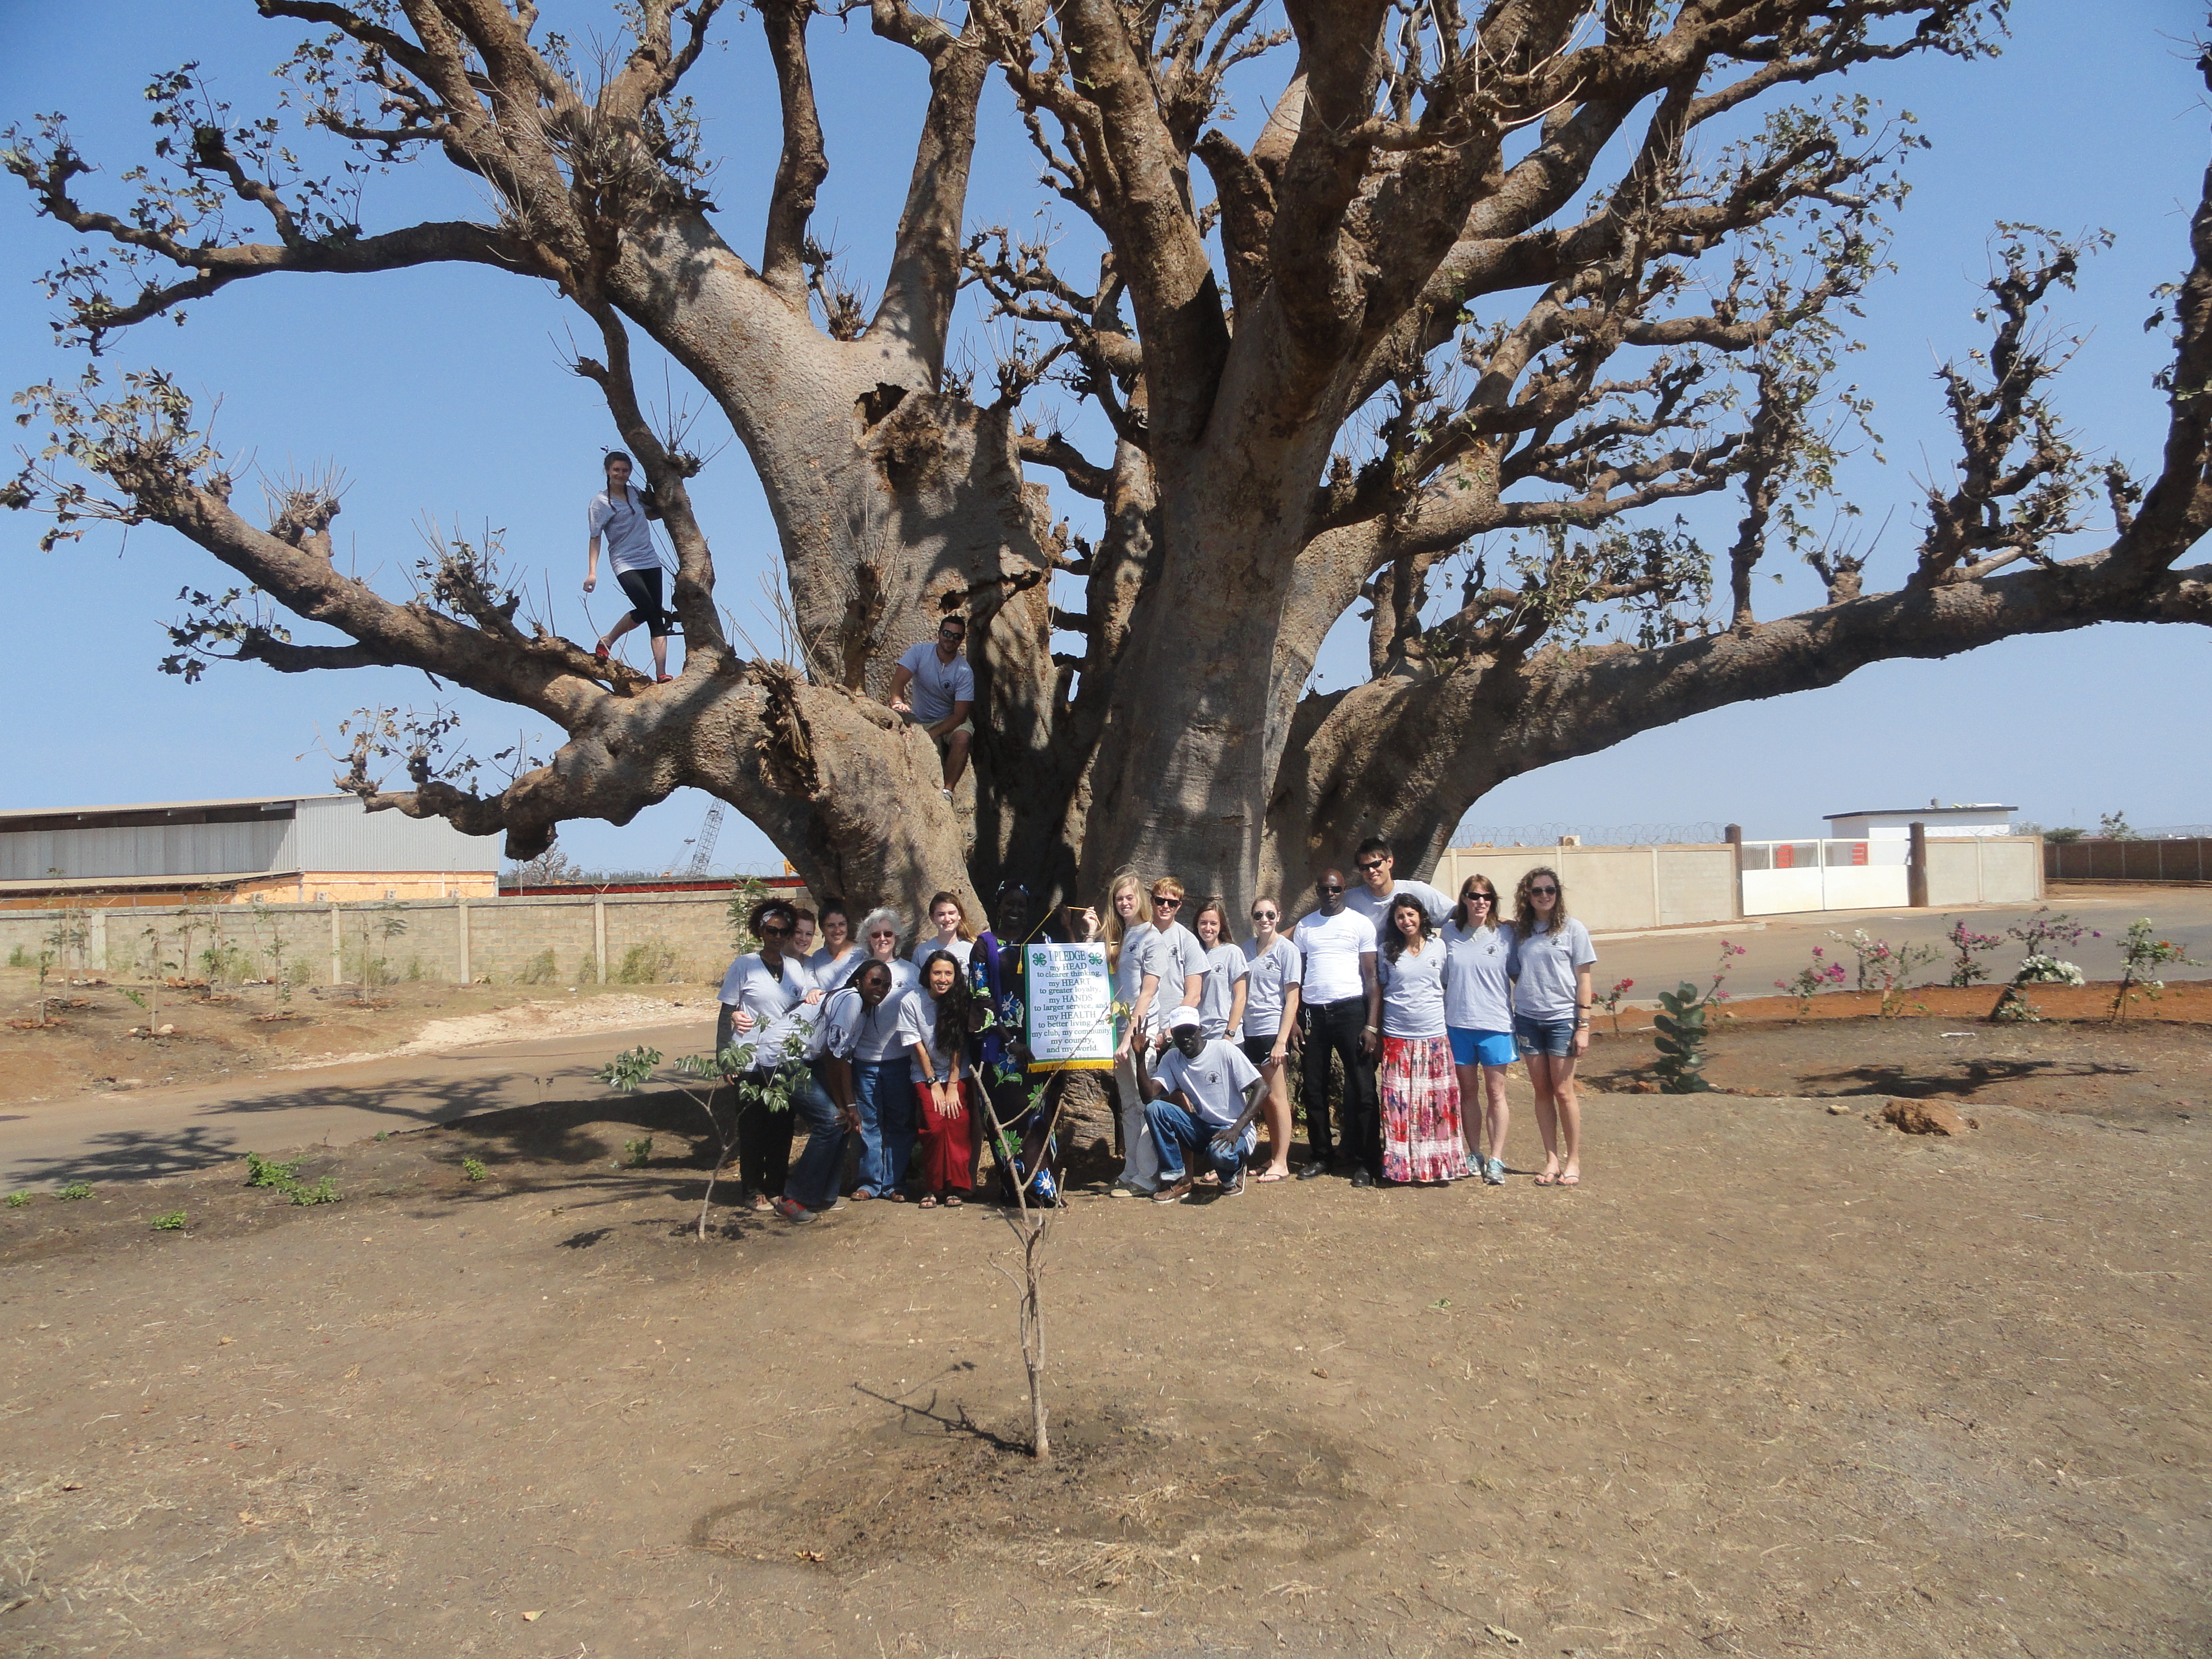 Kaitlyn introducing the first 4-H flag in Senegal to Bineta under the Baobab tree with her classmates and instructors from Virginia Tech